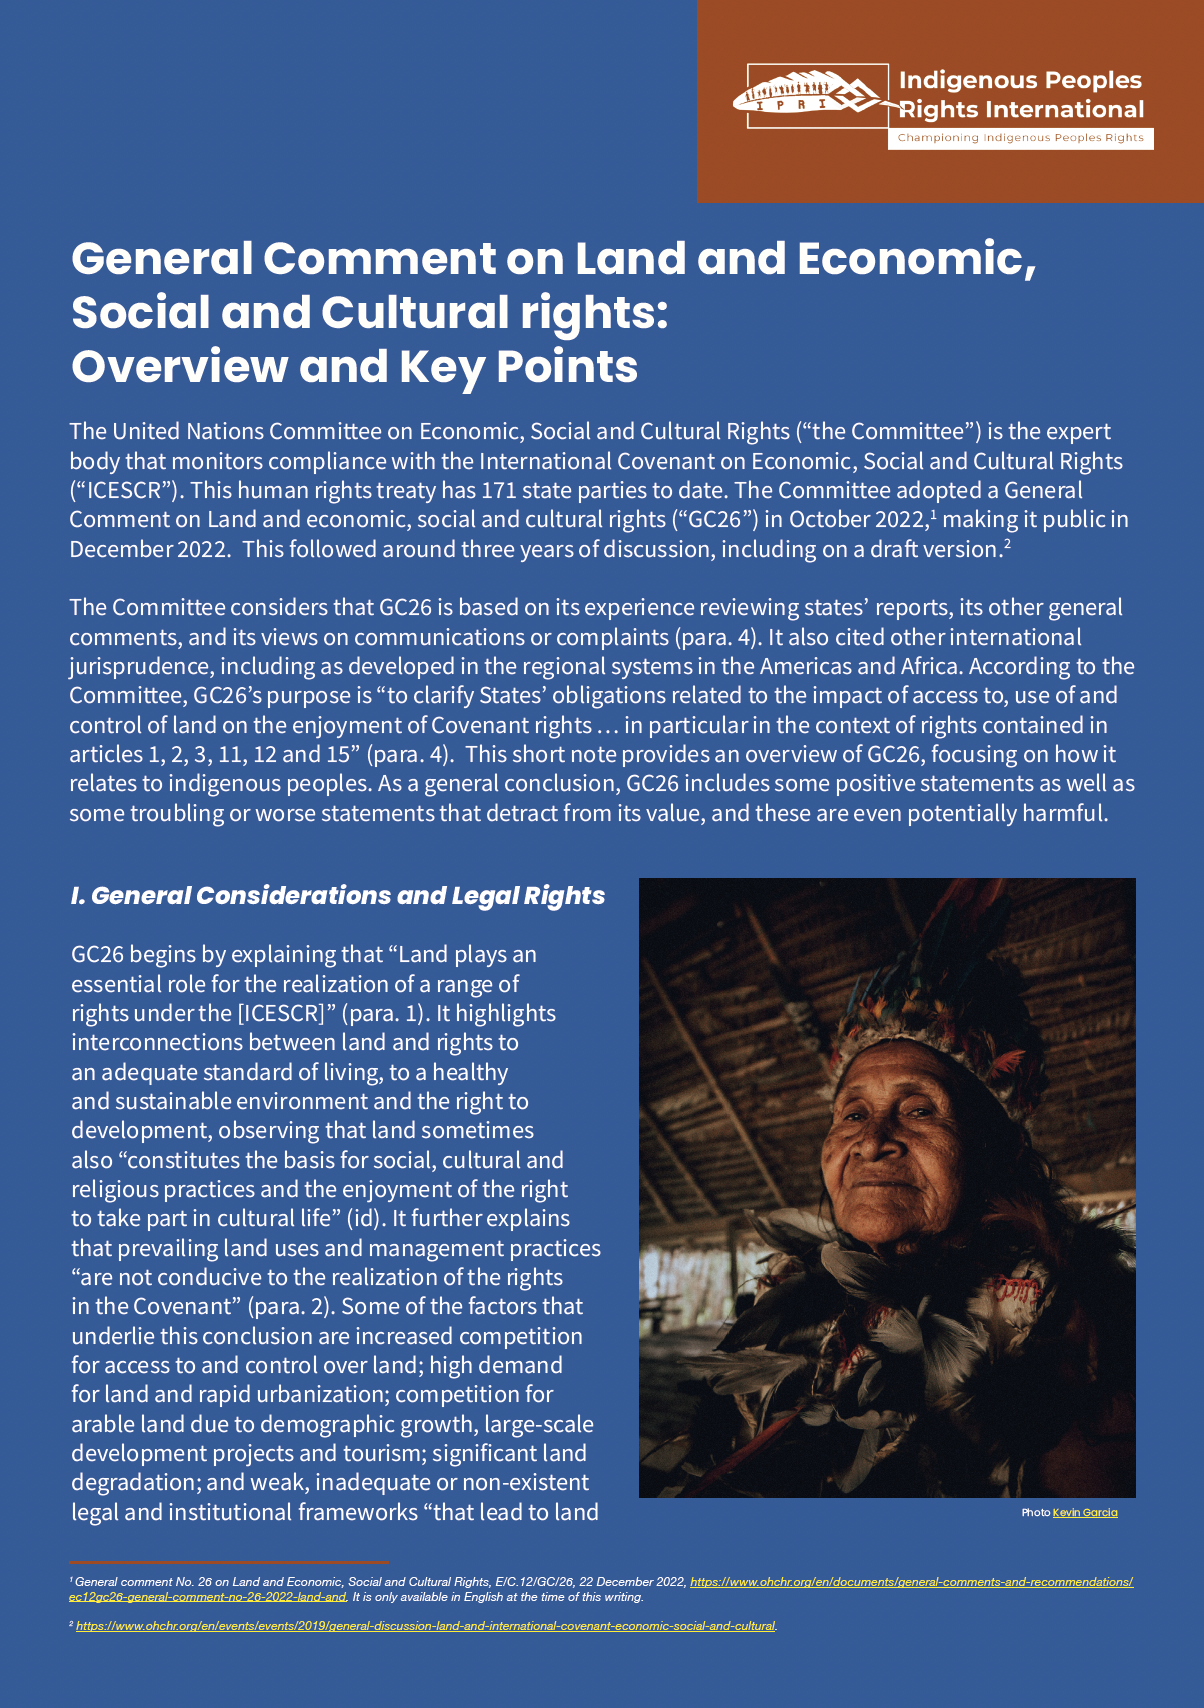 General Comment on Land and Economic, Social and Cultural rights: Overview and Key Points